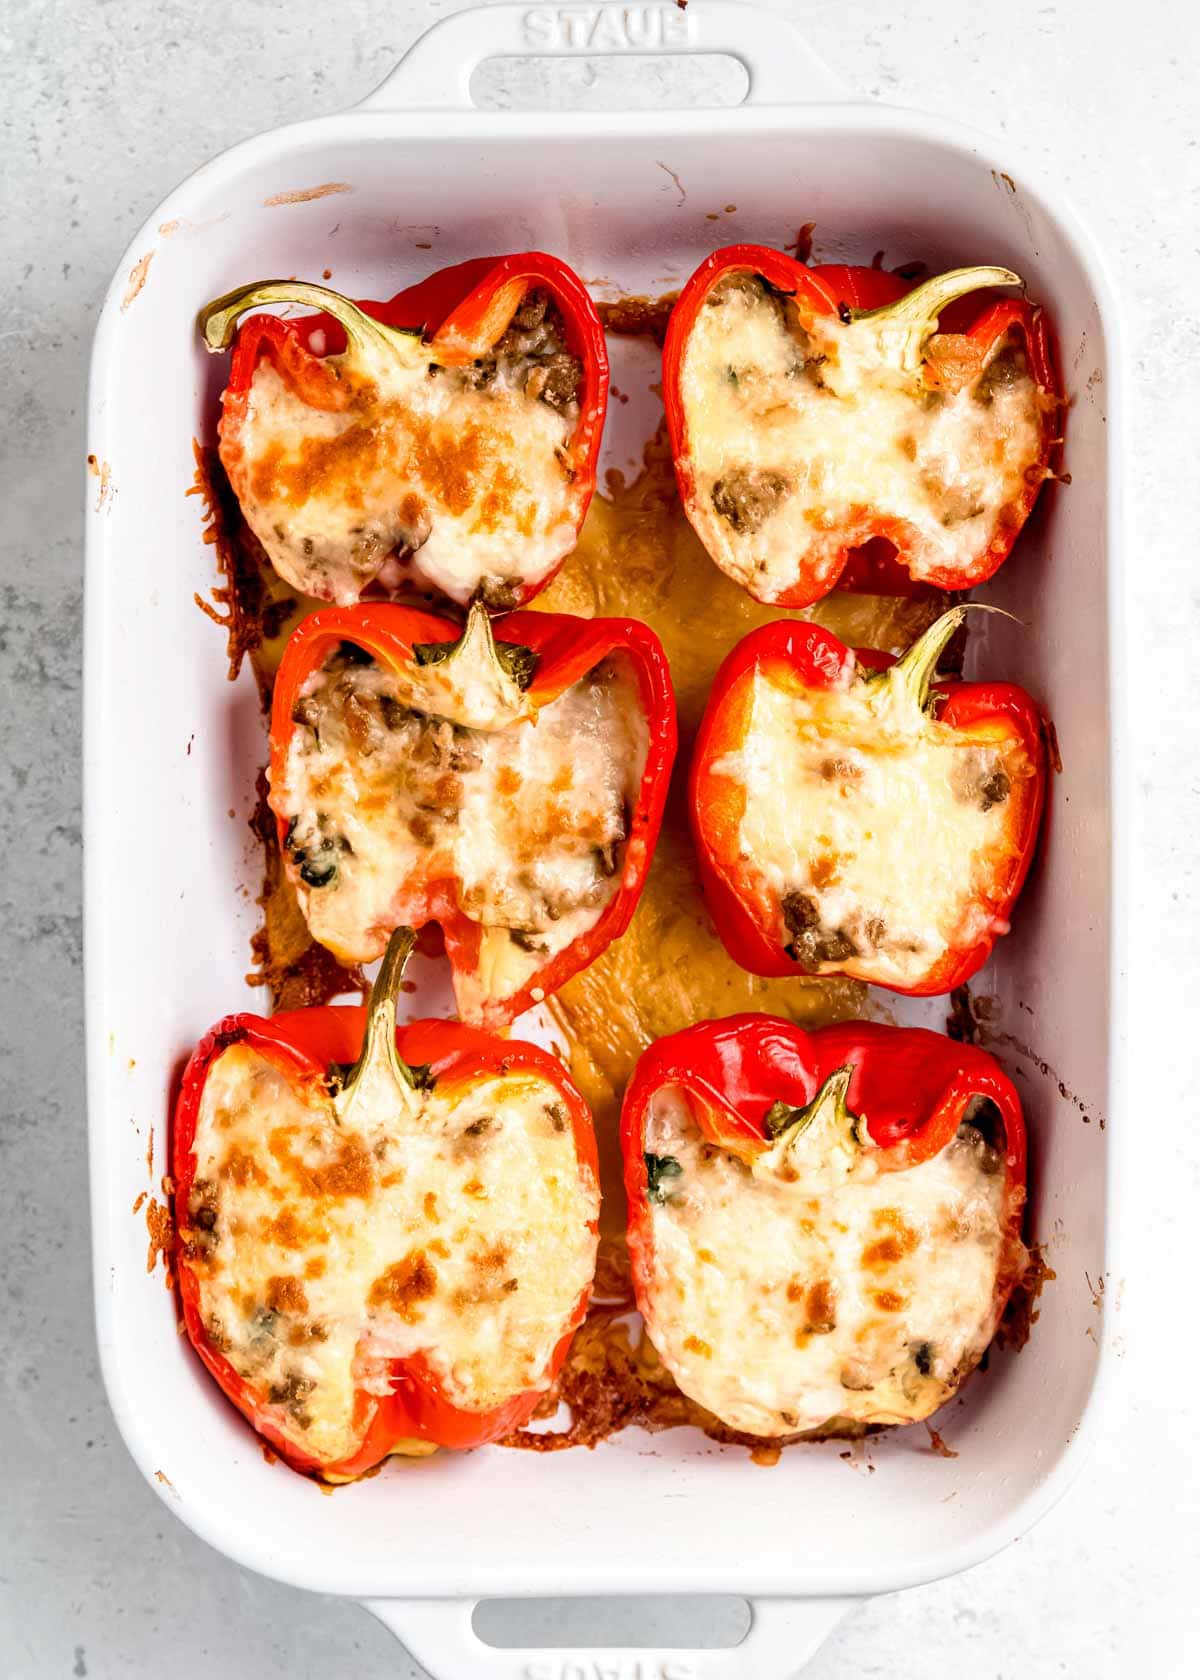 cooked breakfast stuffed bell peppers in baking dish